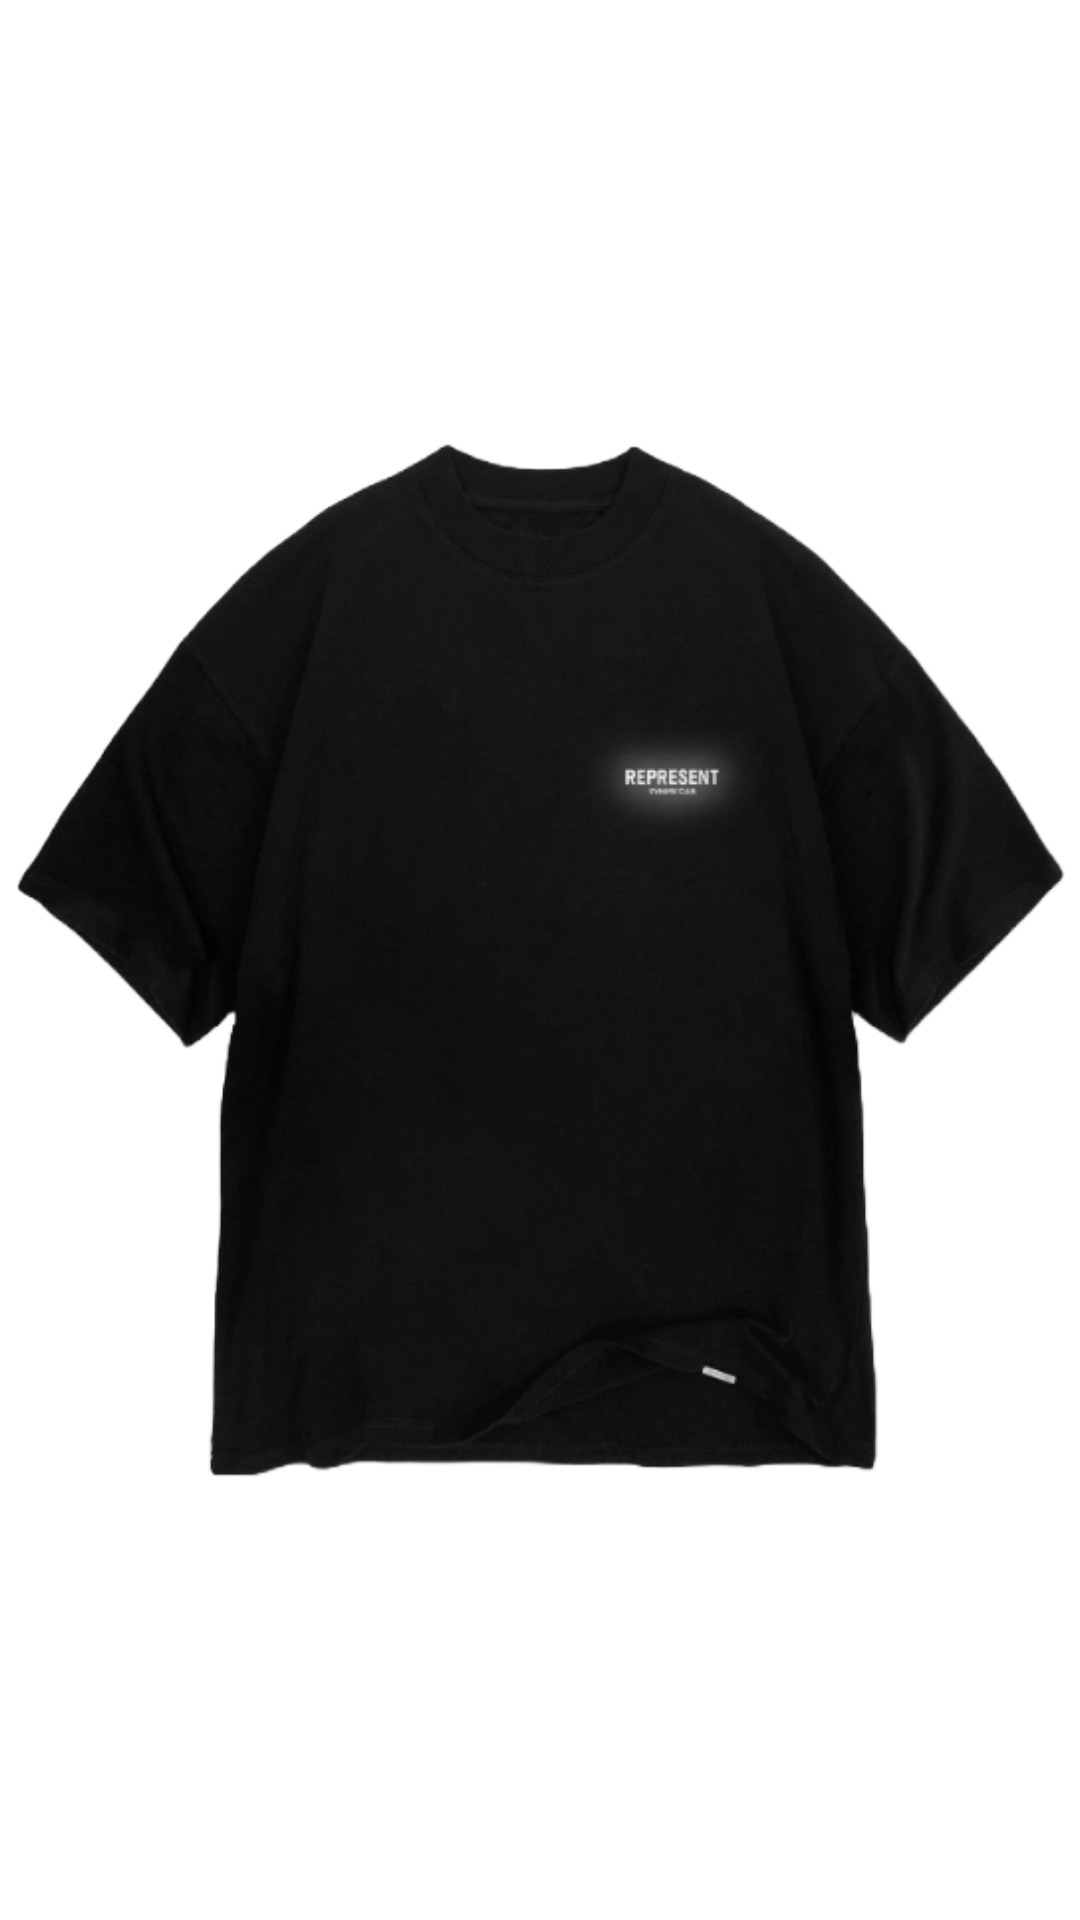 REPRESENT OWNERS CLUB T-SHIRT - BLACK REFLECTIVE